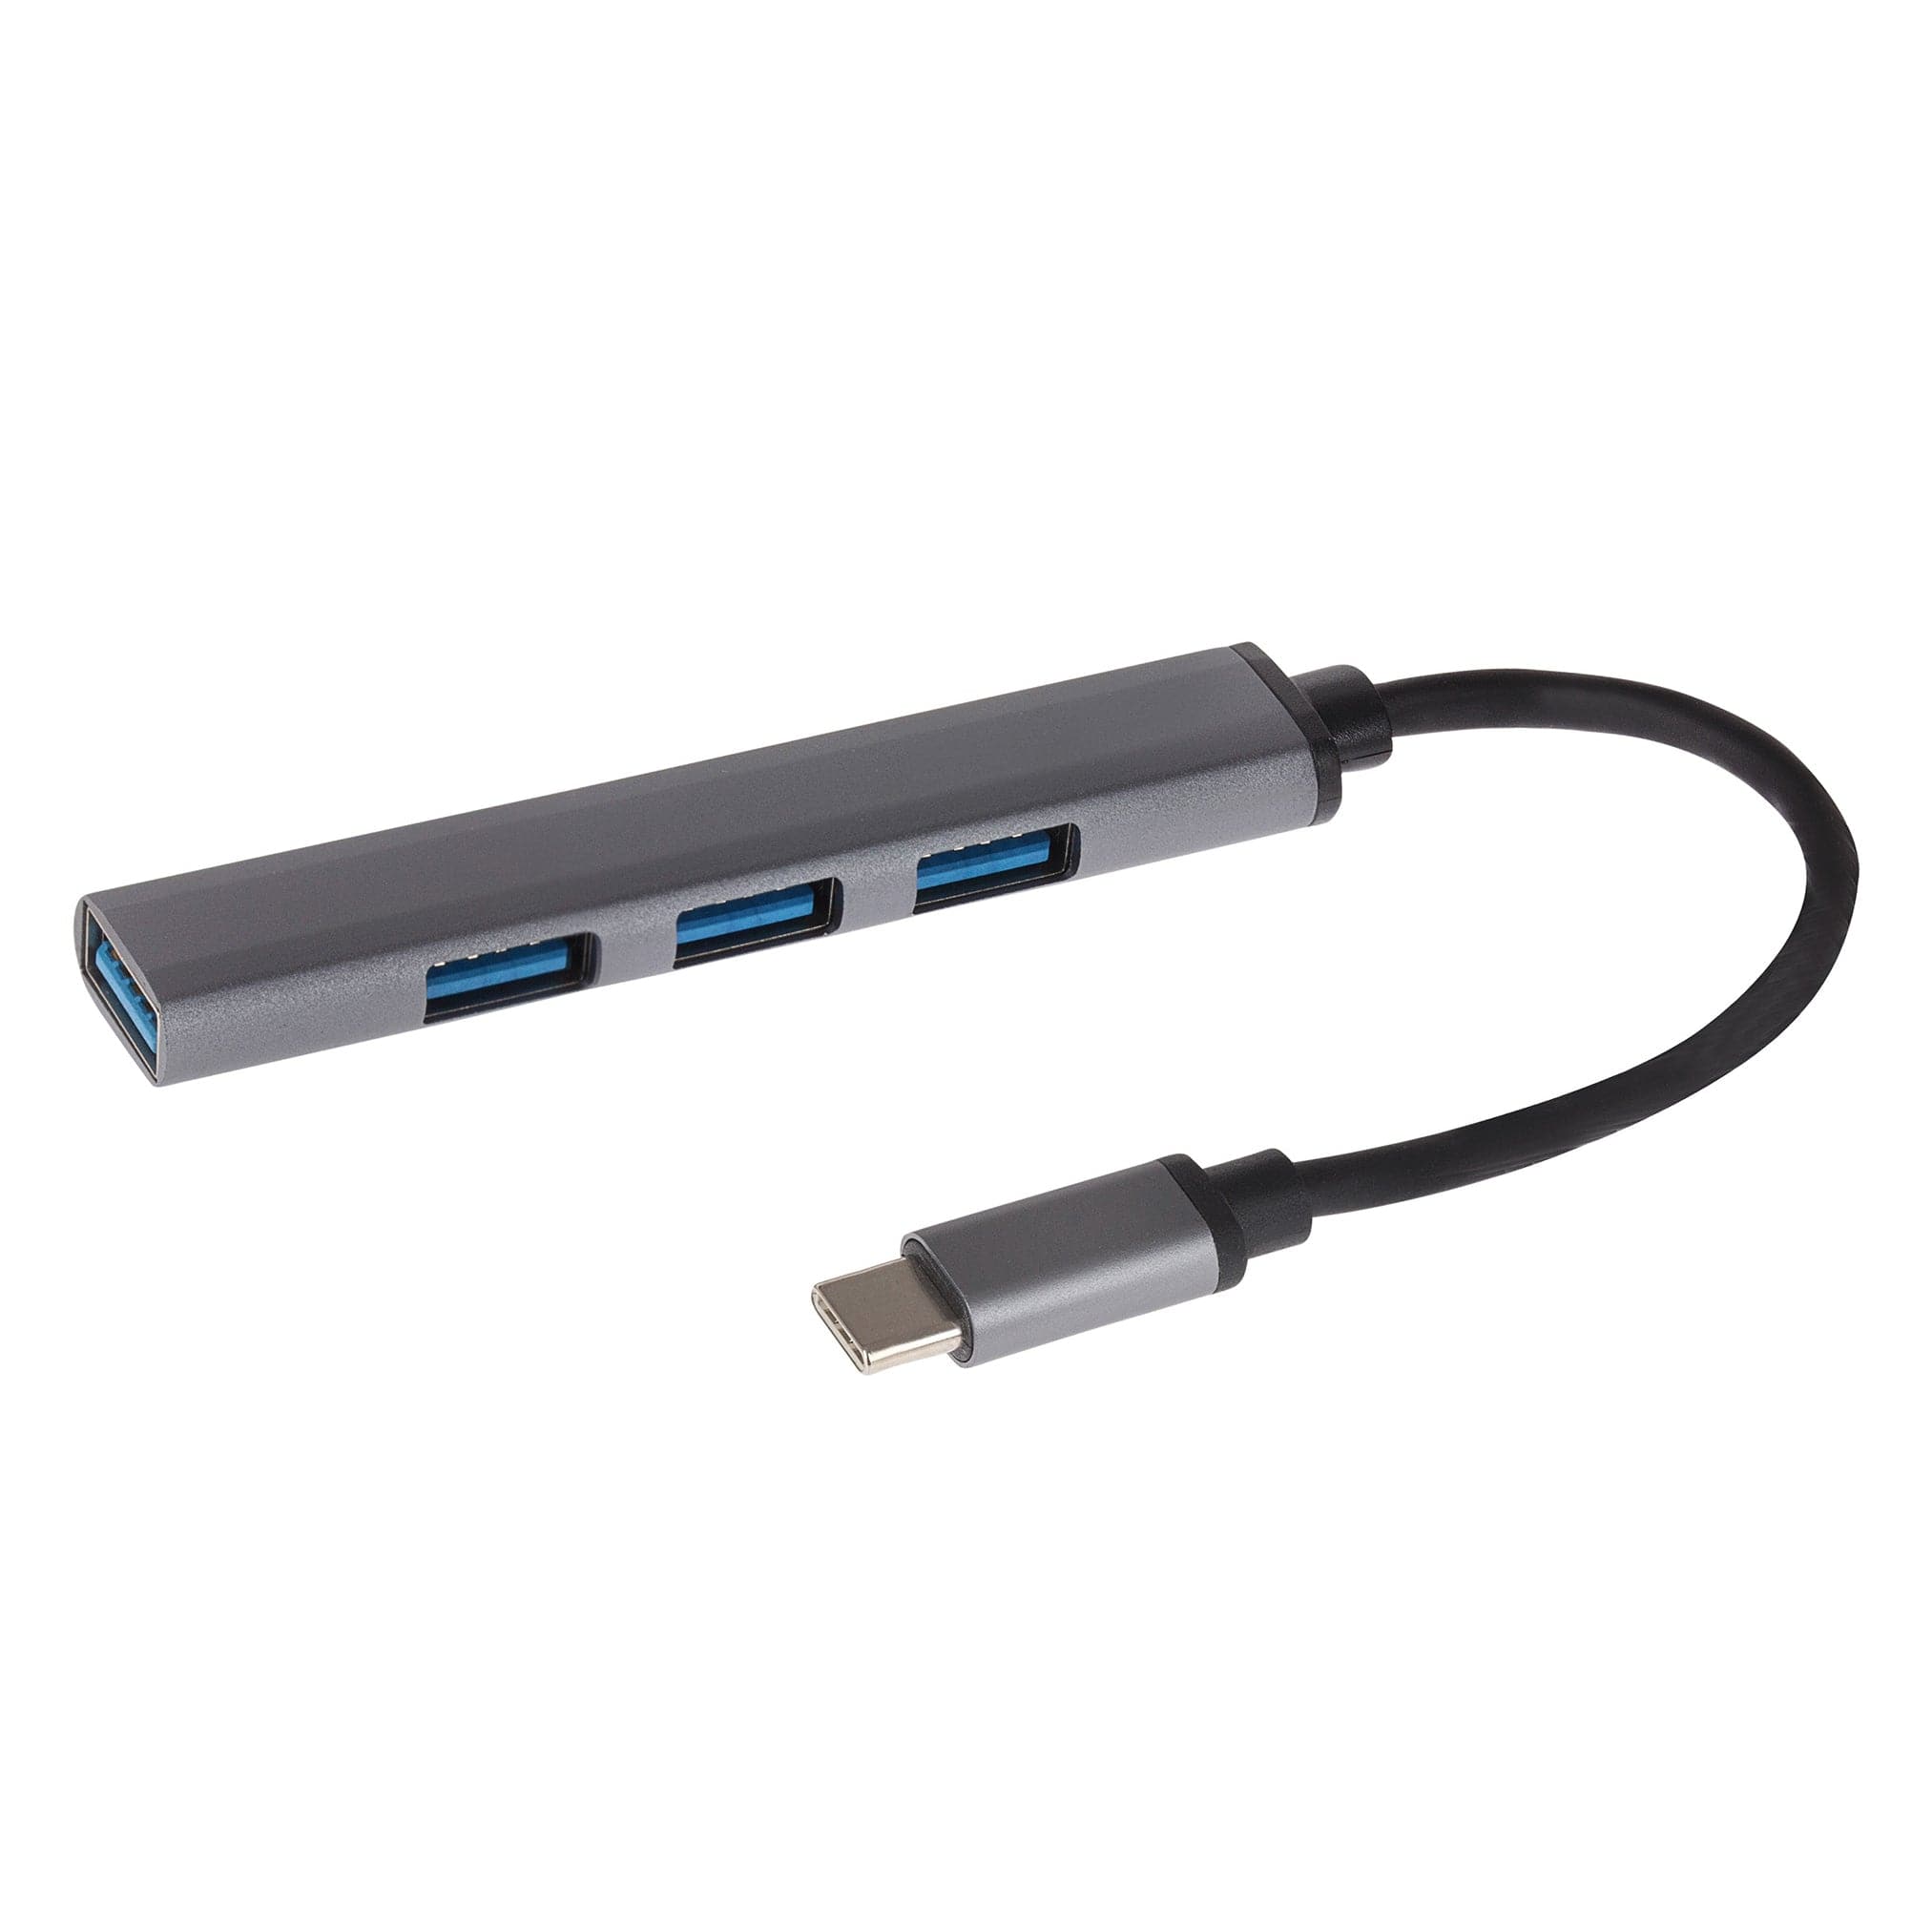 Nikkai USB-C Multiport Hub to 4x USB-A 3.1 Super Speed with 13cm Cable